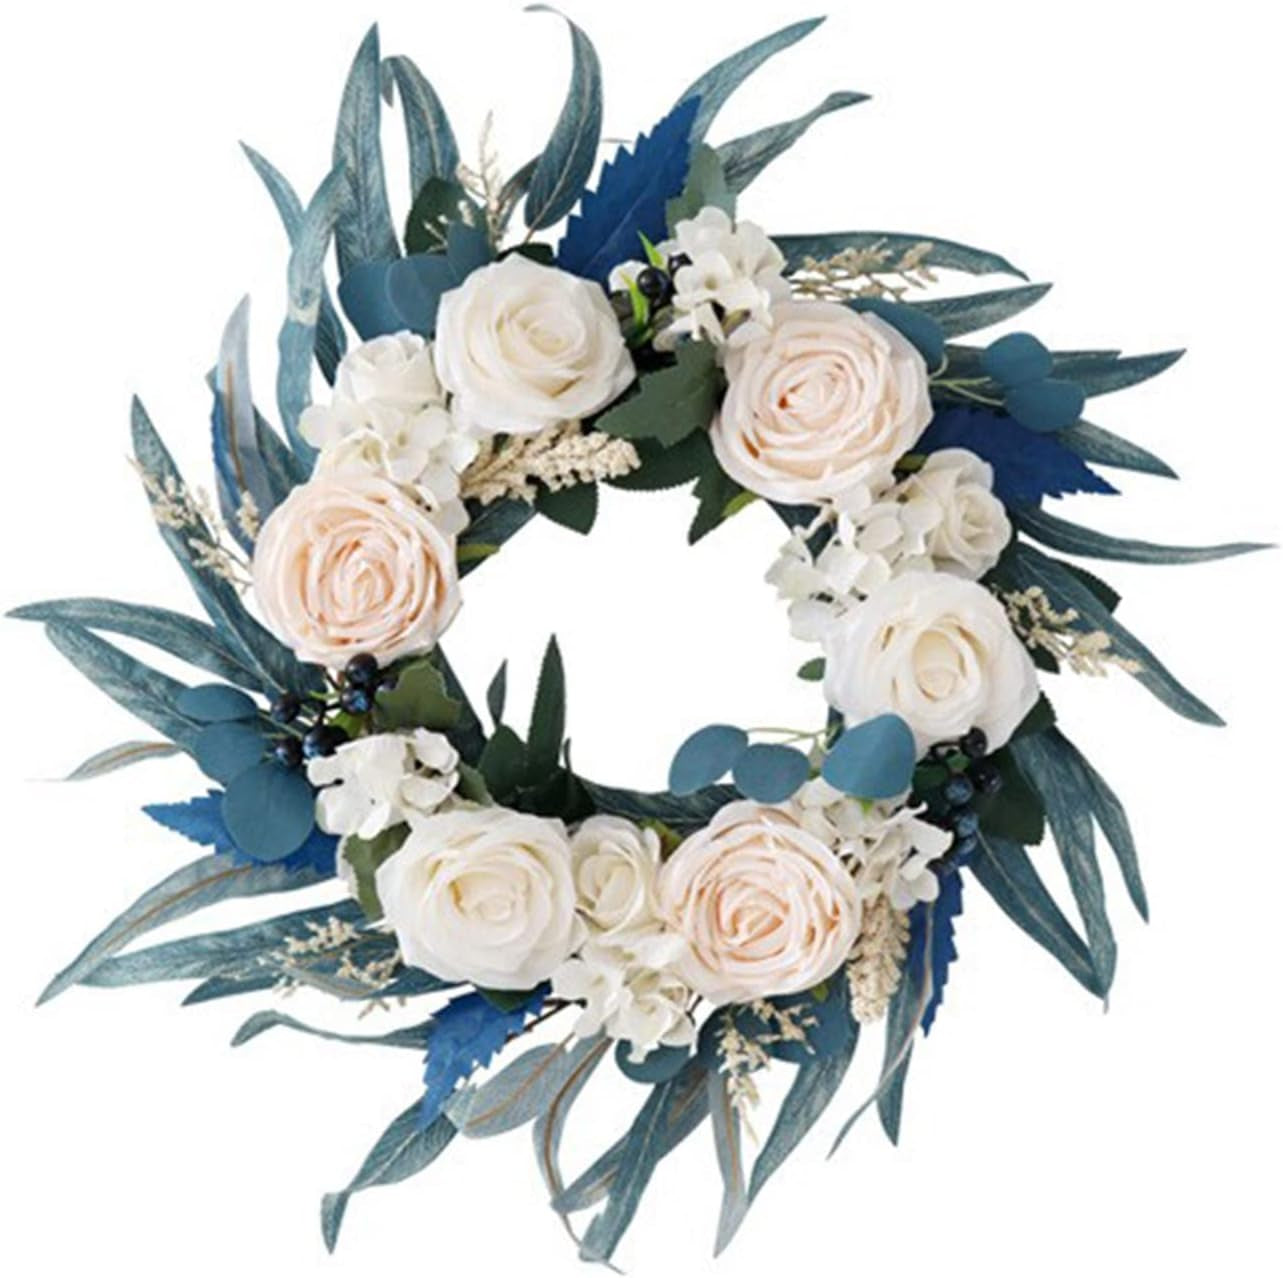 IUIBMI Spring Wreath with Malachite Blue Leaves and Silk Roses Flowers, Artificial Door Wreaths Swag for Front Door, Artificial Flower Wreath for Lintel Wall Window Wedding Arch Party Home Decor